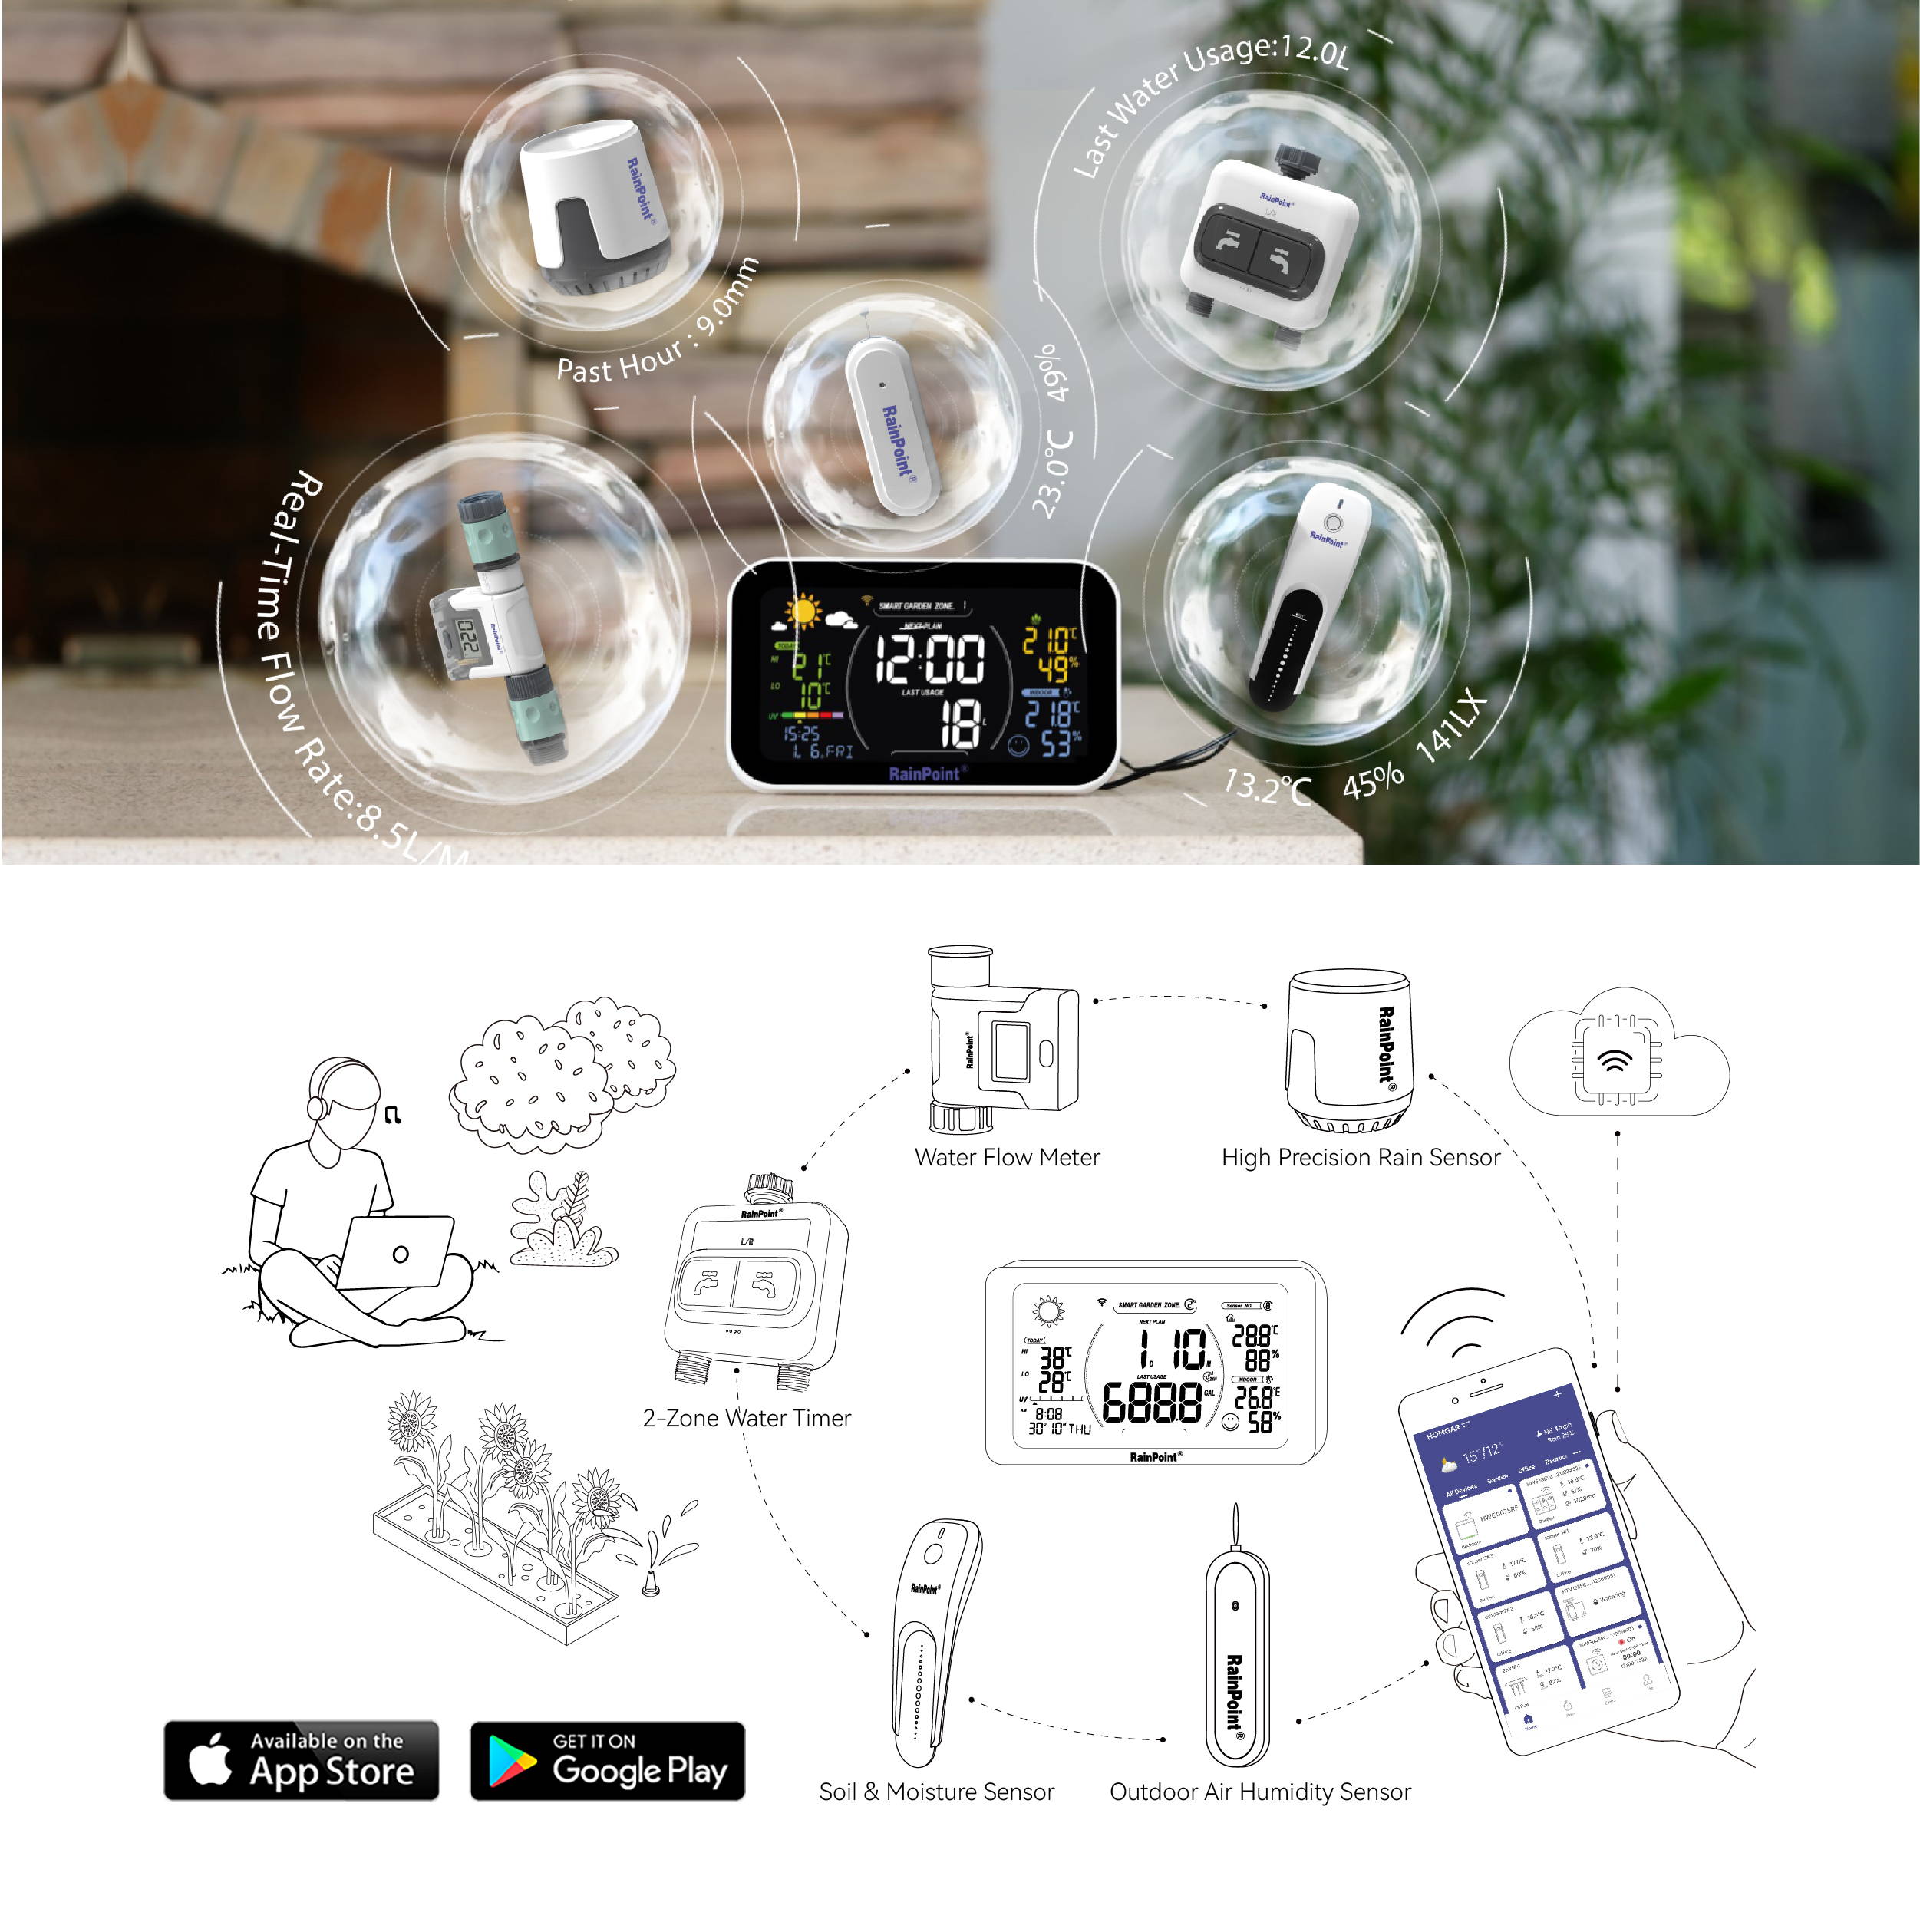 RainPoint is an intelligent irrigation system that integrates a Water Timer, Soil & Sunlight Sensor, Rain Gauge, and Outdoor Thermometer for self-analysis and regulation. With RainPoint Smart+. you can experience the wonder of a future garden today.